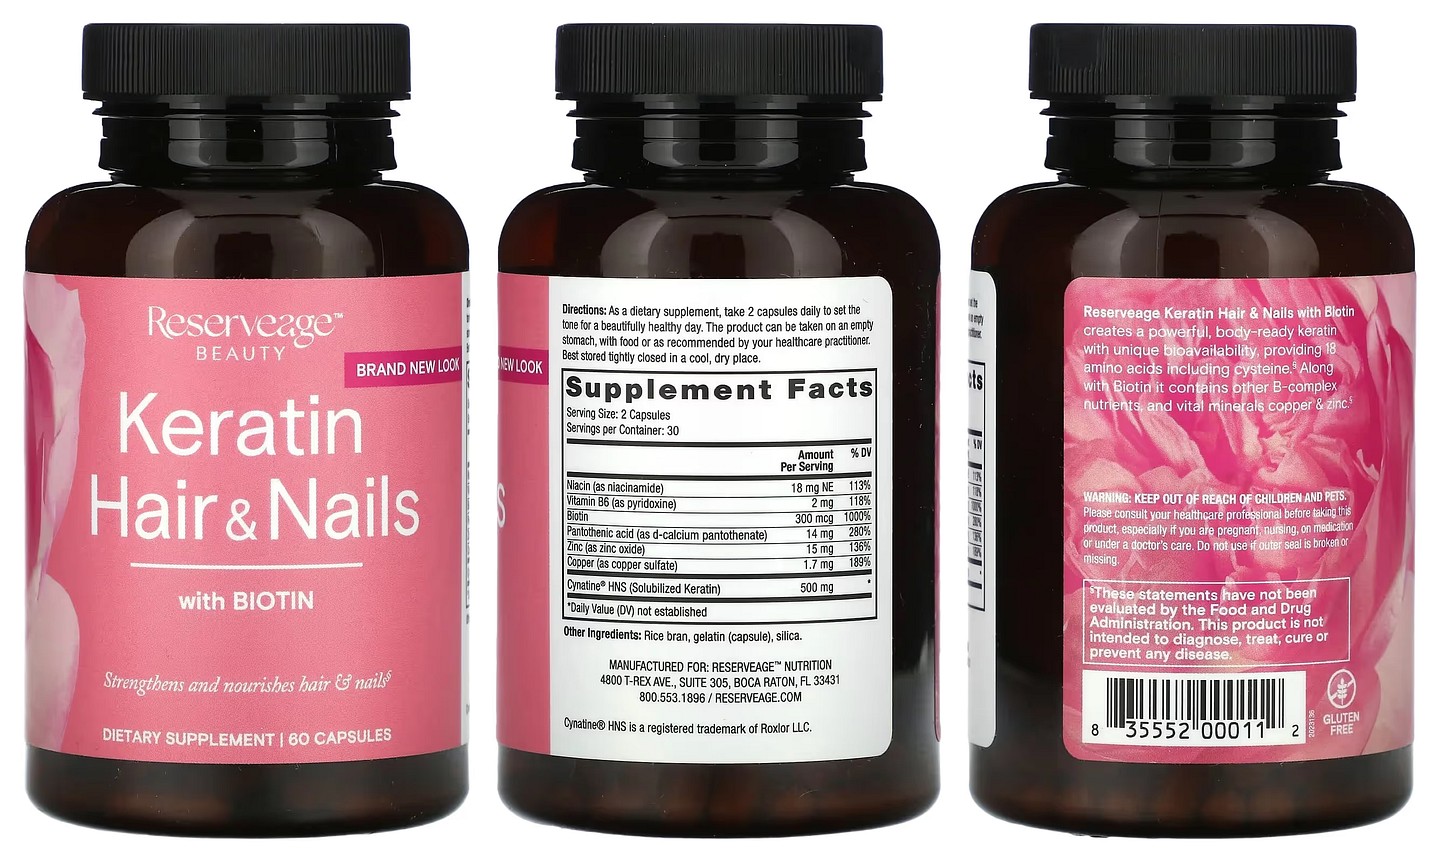 Reserveage Beauty, Keratin Hair & Nails With Biotin packaging